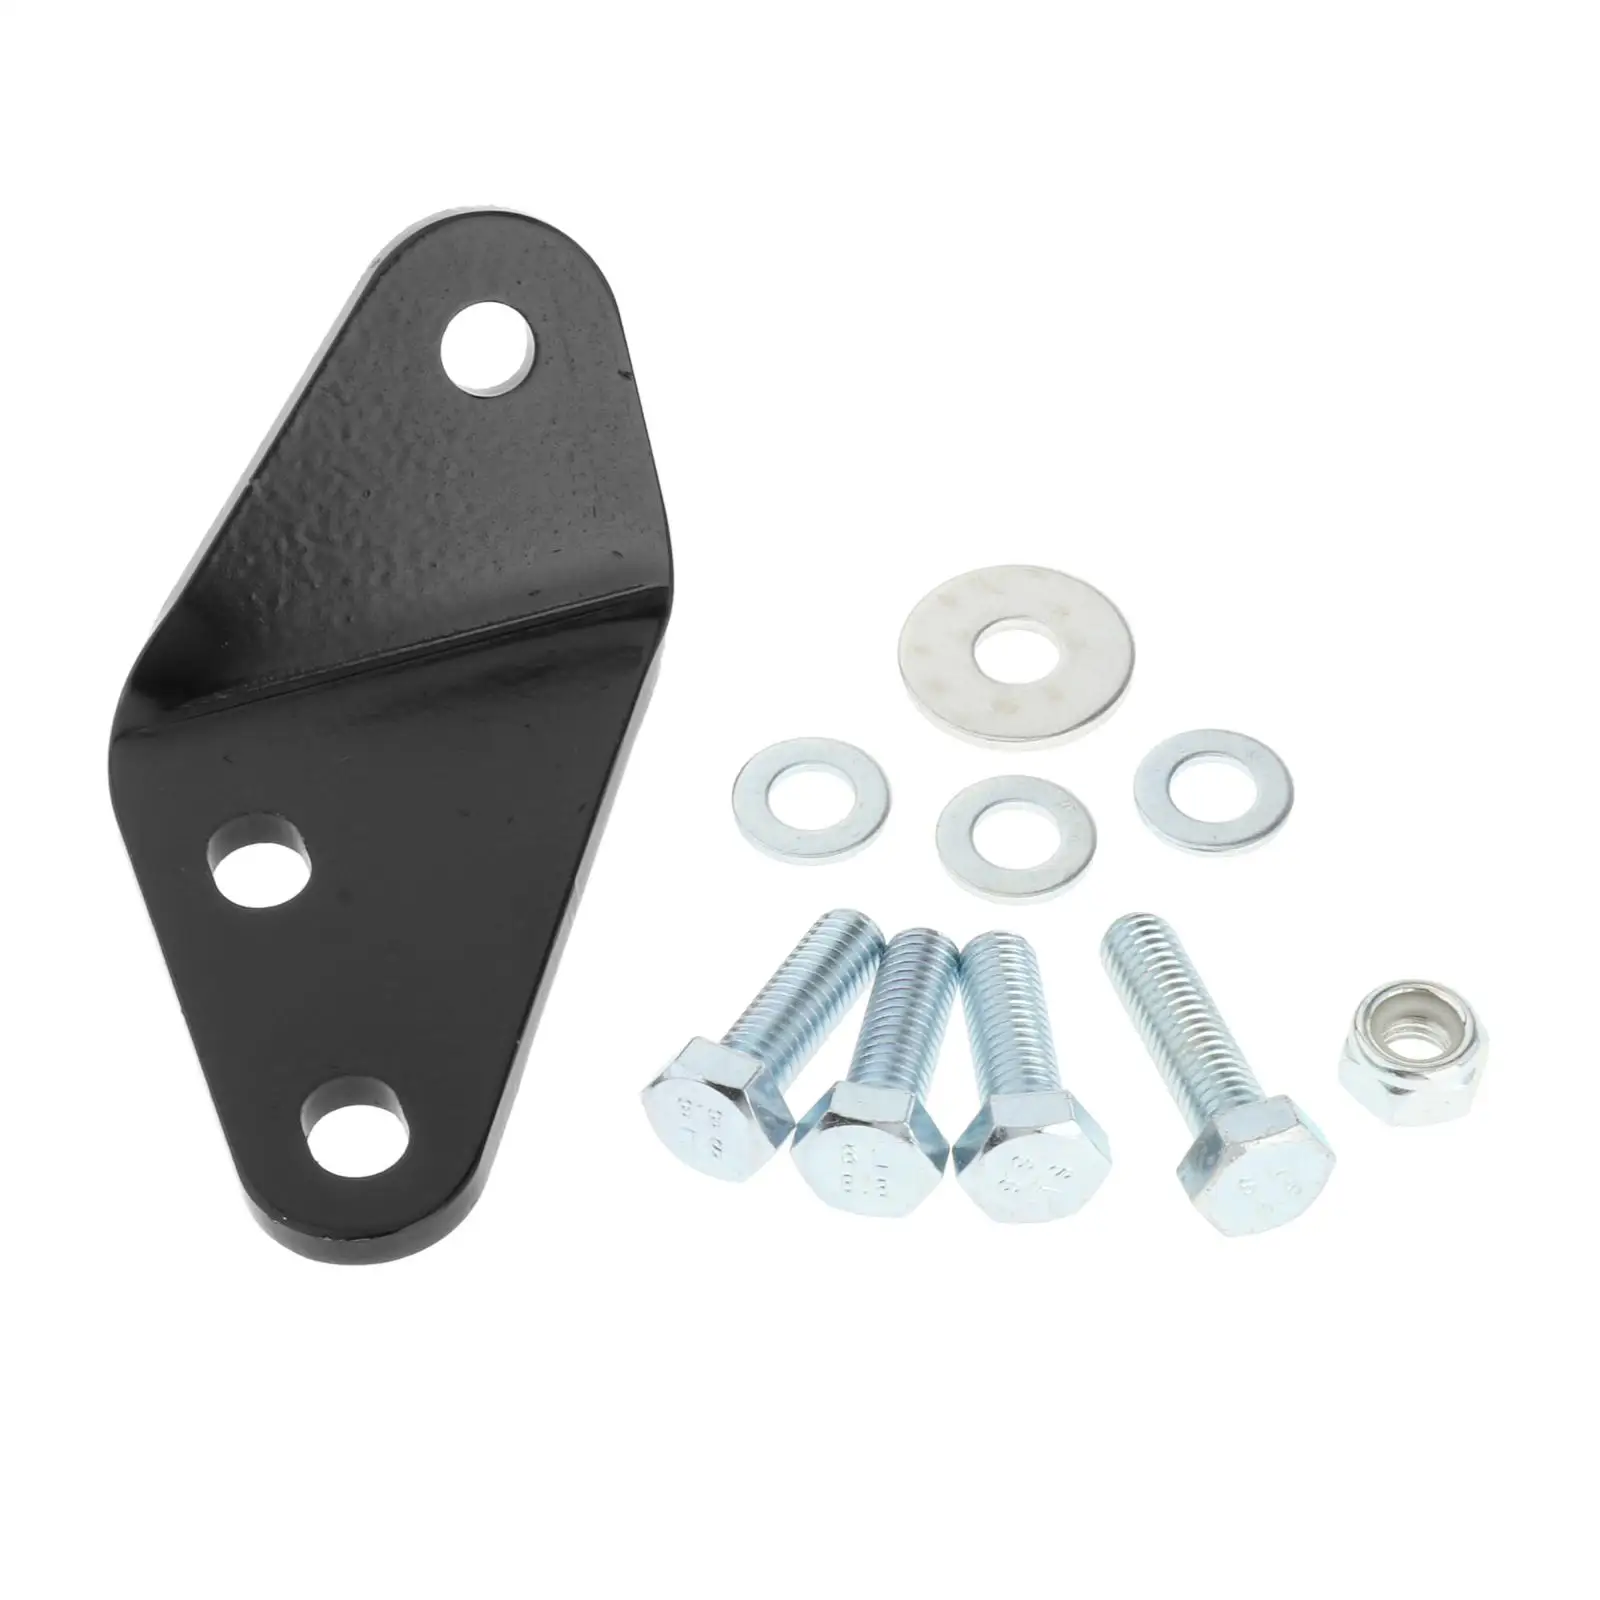 Durable Assembly Clutch Pedal Bracket for Vw T4 Transporter Automobile Iron